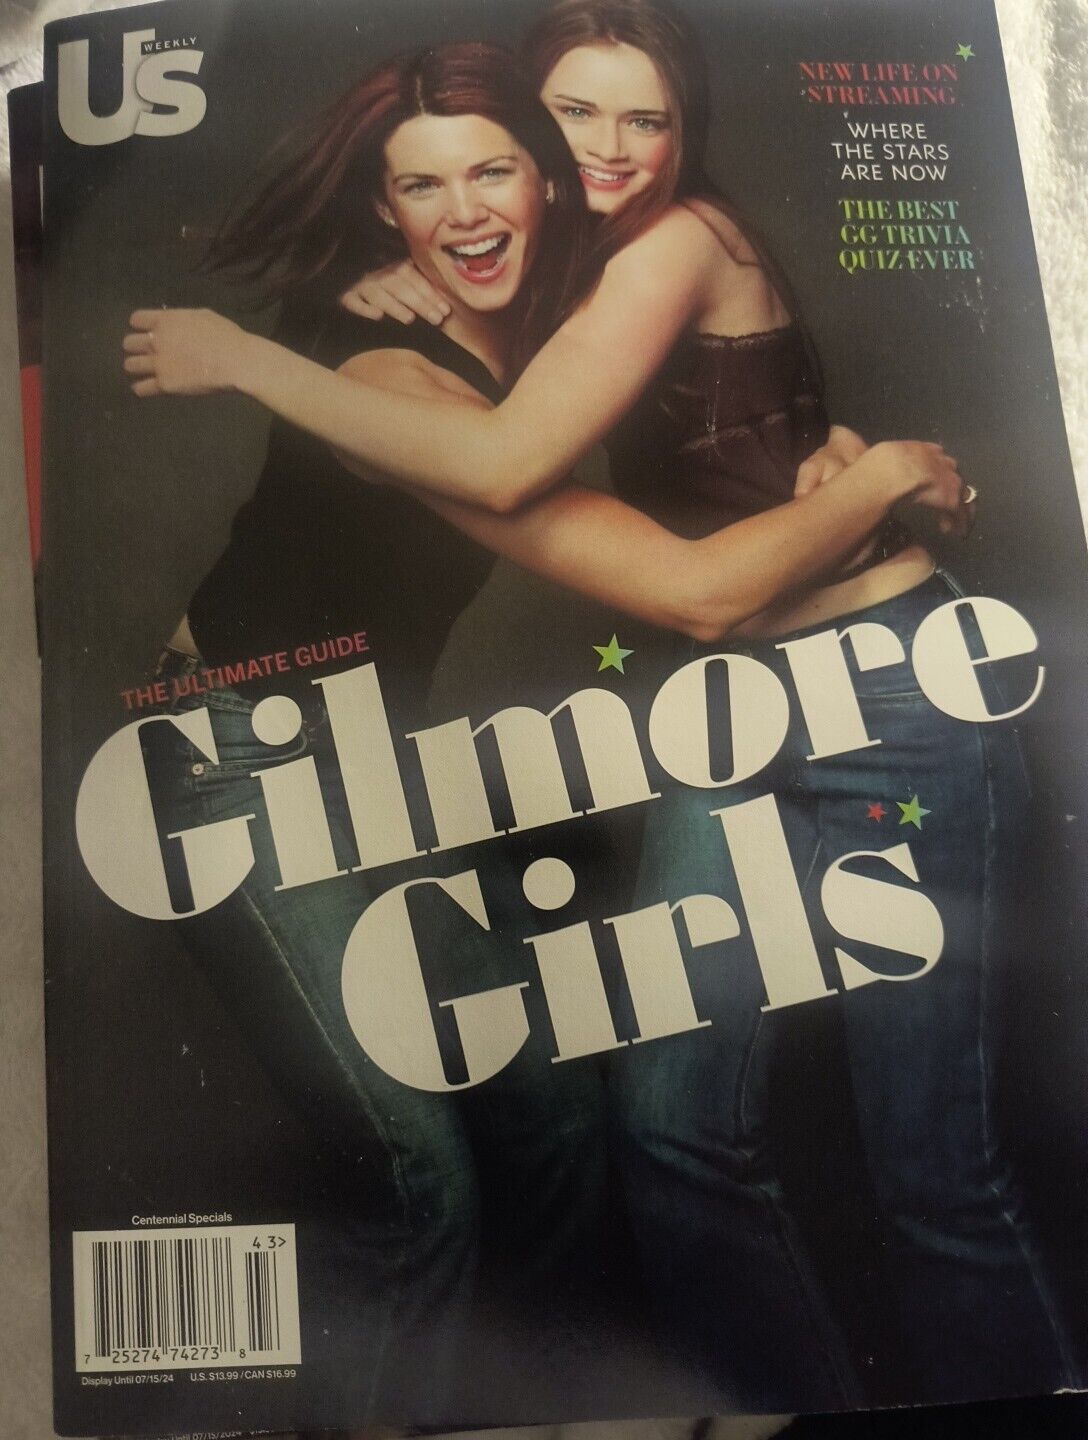 CENTENNIAL Specials &US WEEKLY The Ultimate Guide Gilmore Girls 